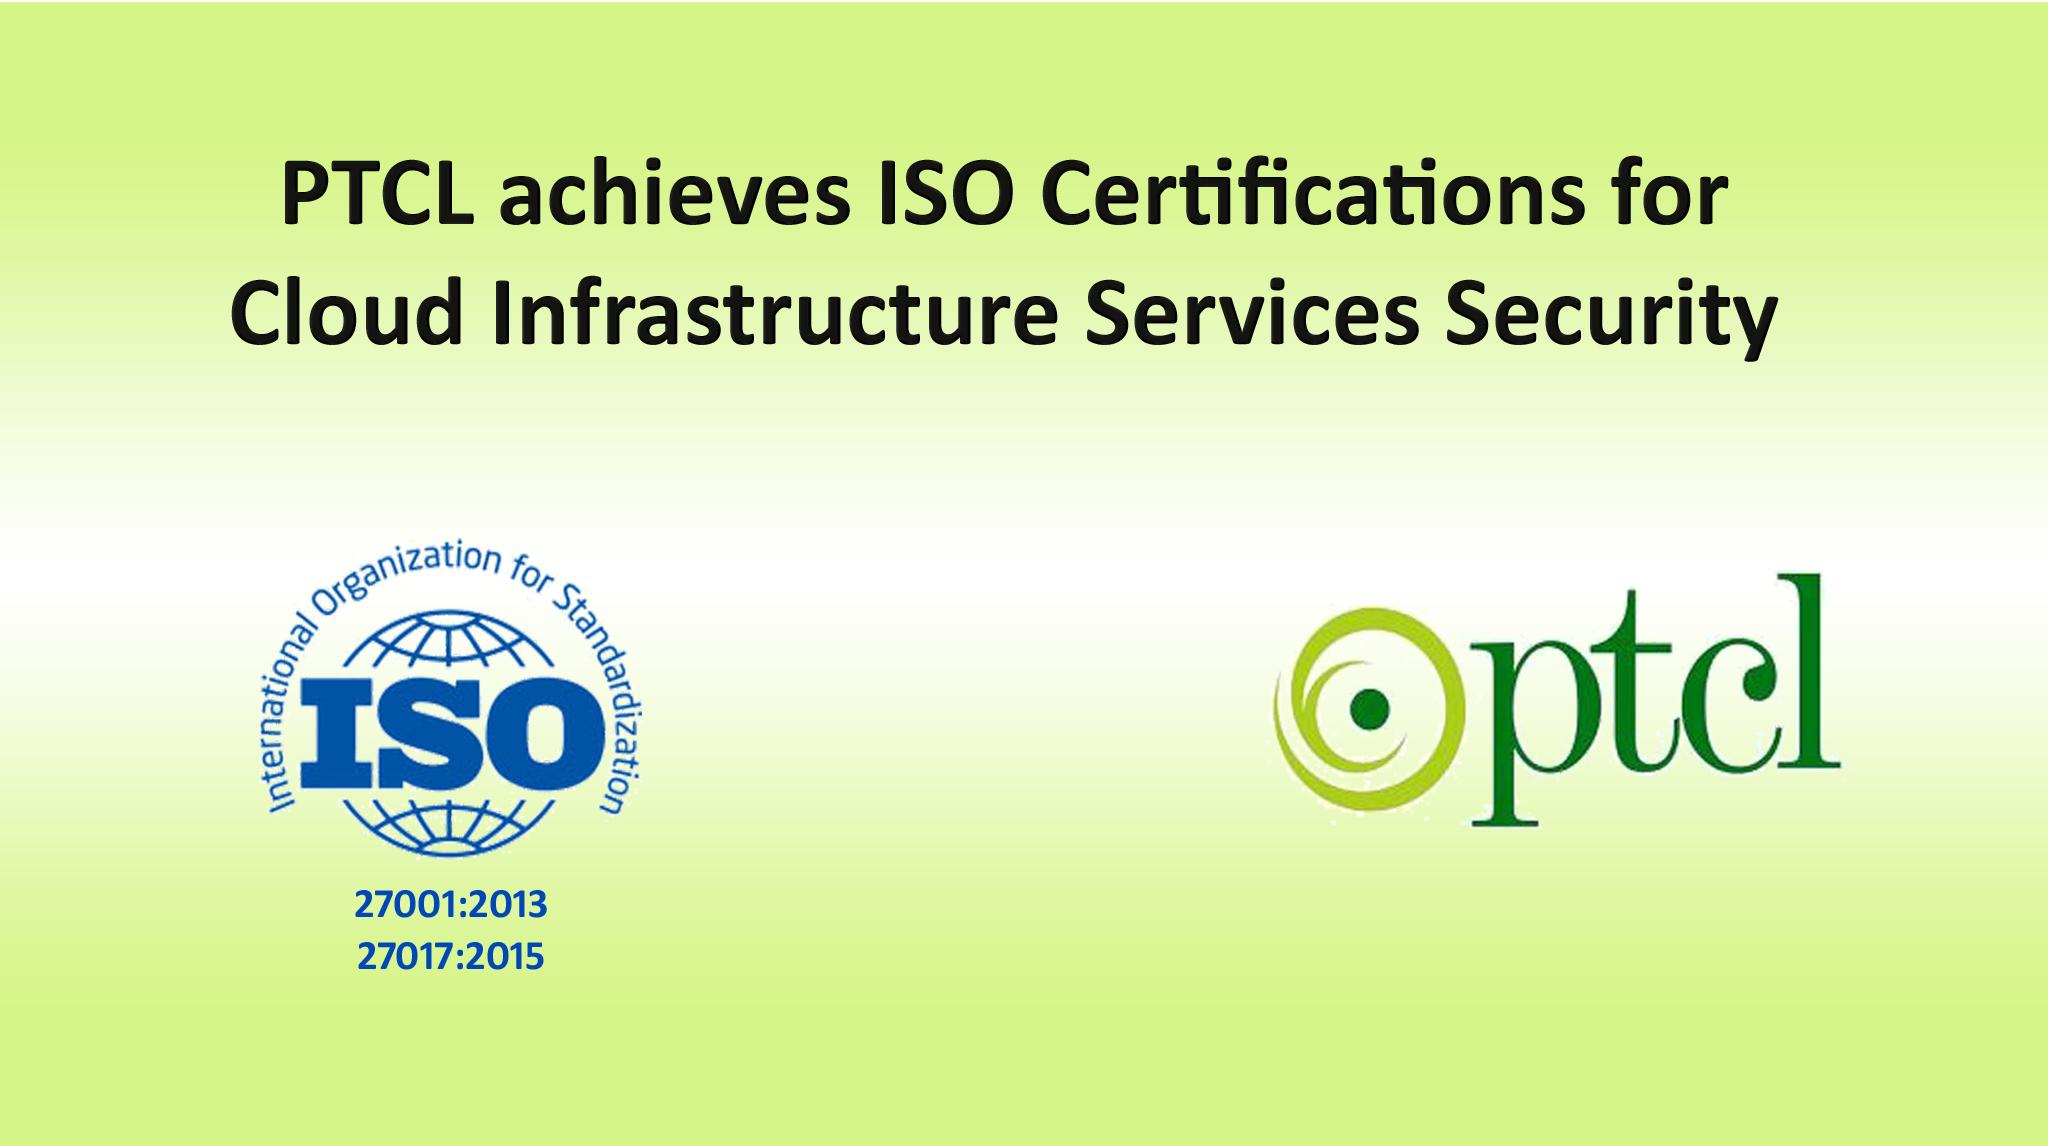 PTCL ACHIEVES ISO CERTIFICATIONS FOR CLOUD INFRASTRUCTURE SERVICES SECURITY